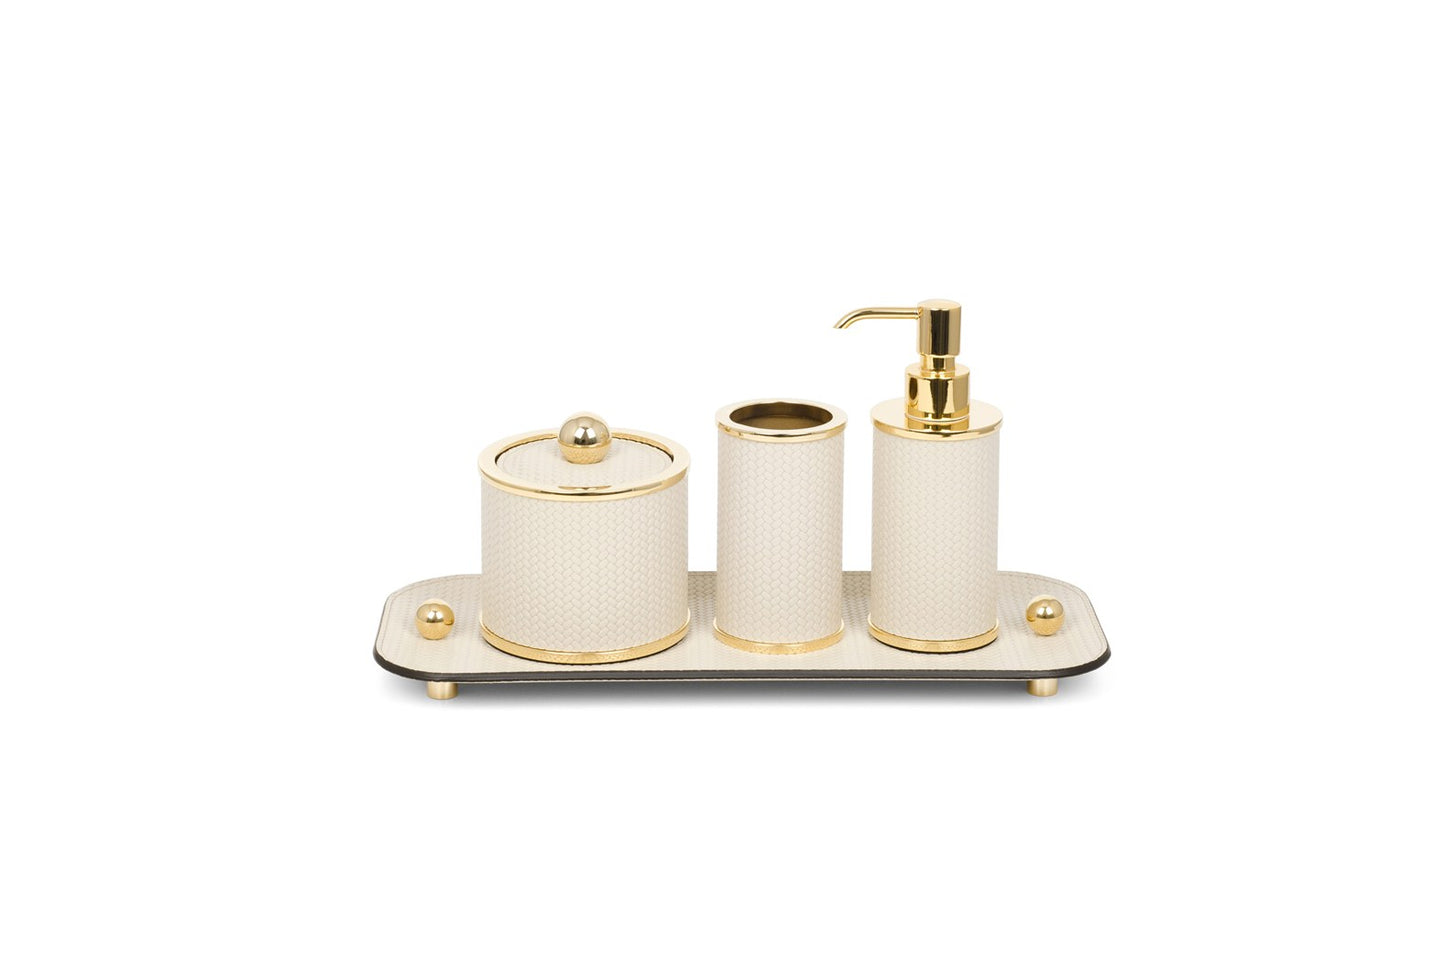 Olimpia Leather Covered Bathroom Set by Pinetti | Made in brass with shiny gold, burnished, or chromed finish | Consists of items available separately: soap dispenser, toothbrush holder, small box, large box | Home Decor Bathroom Accessories | 2Jour Concierge, your luxury lifestyle shop